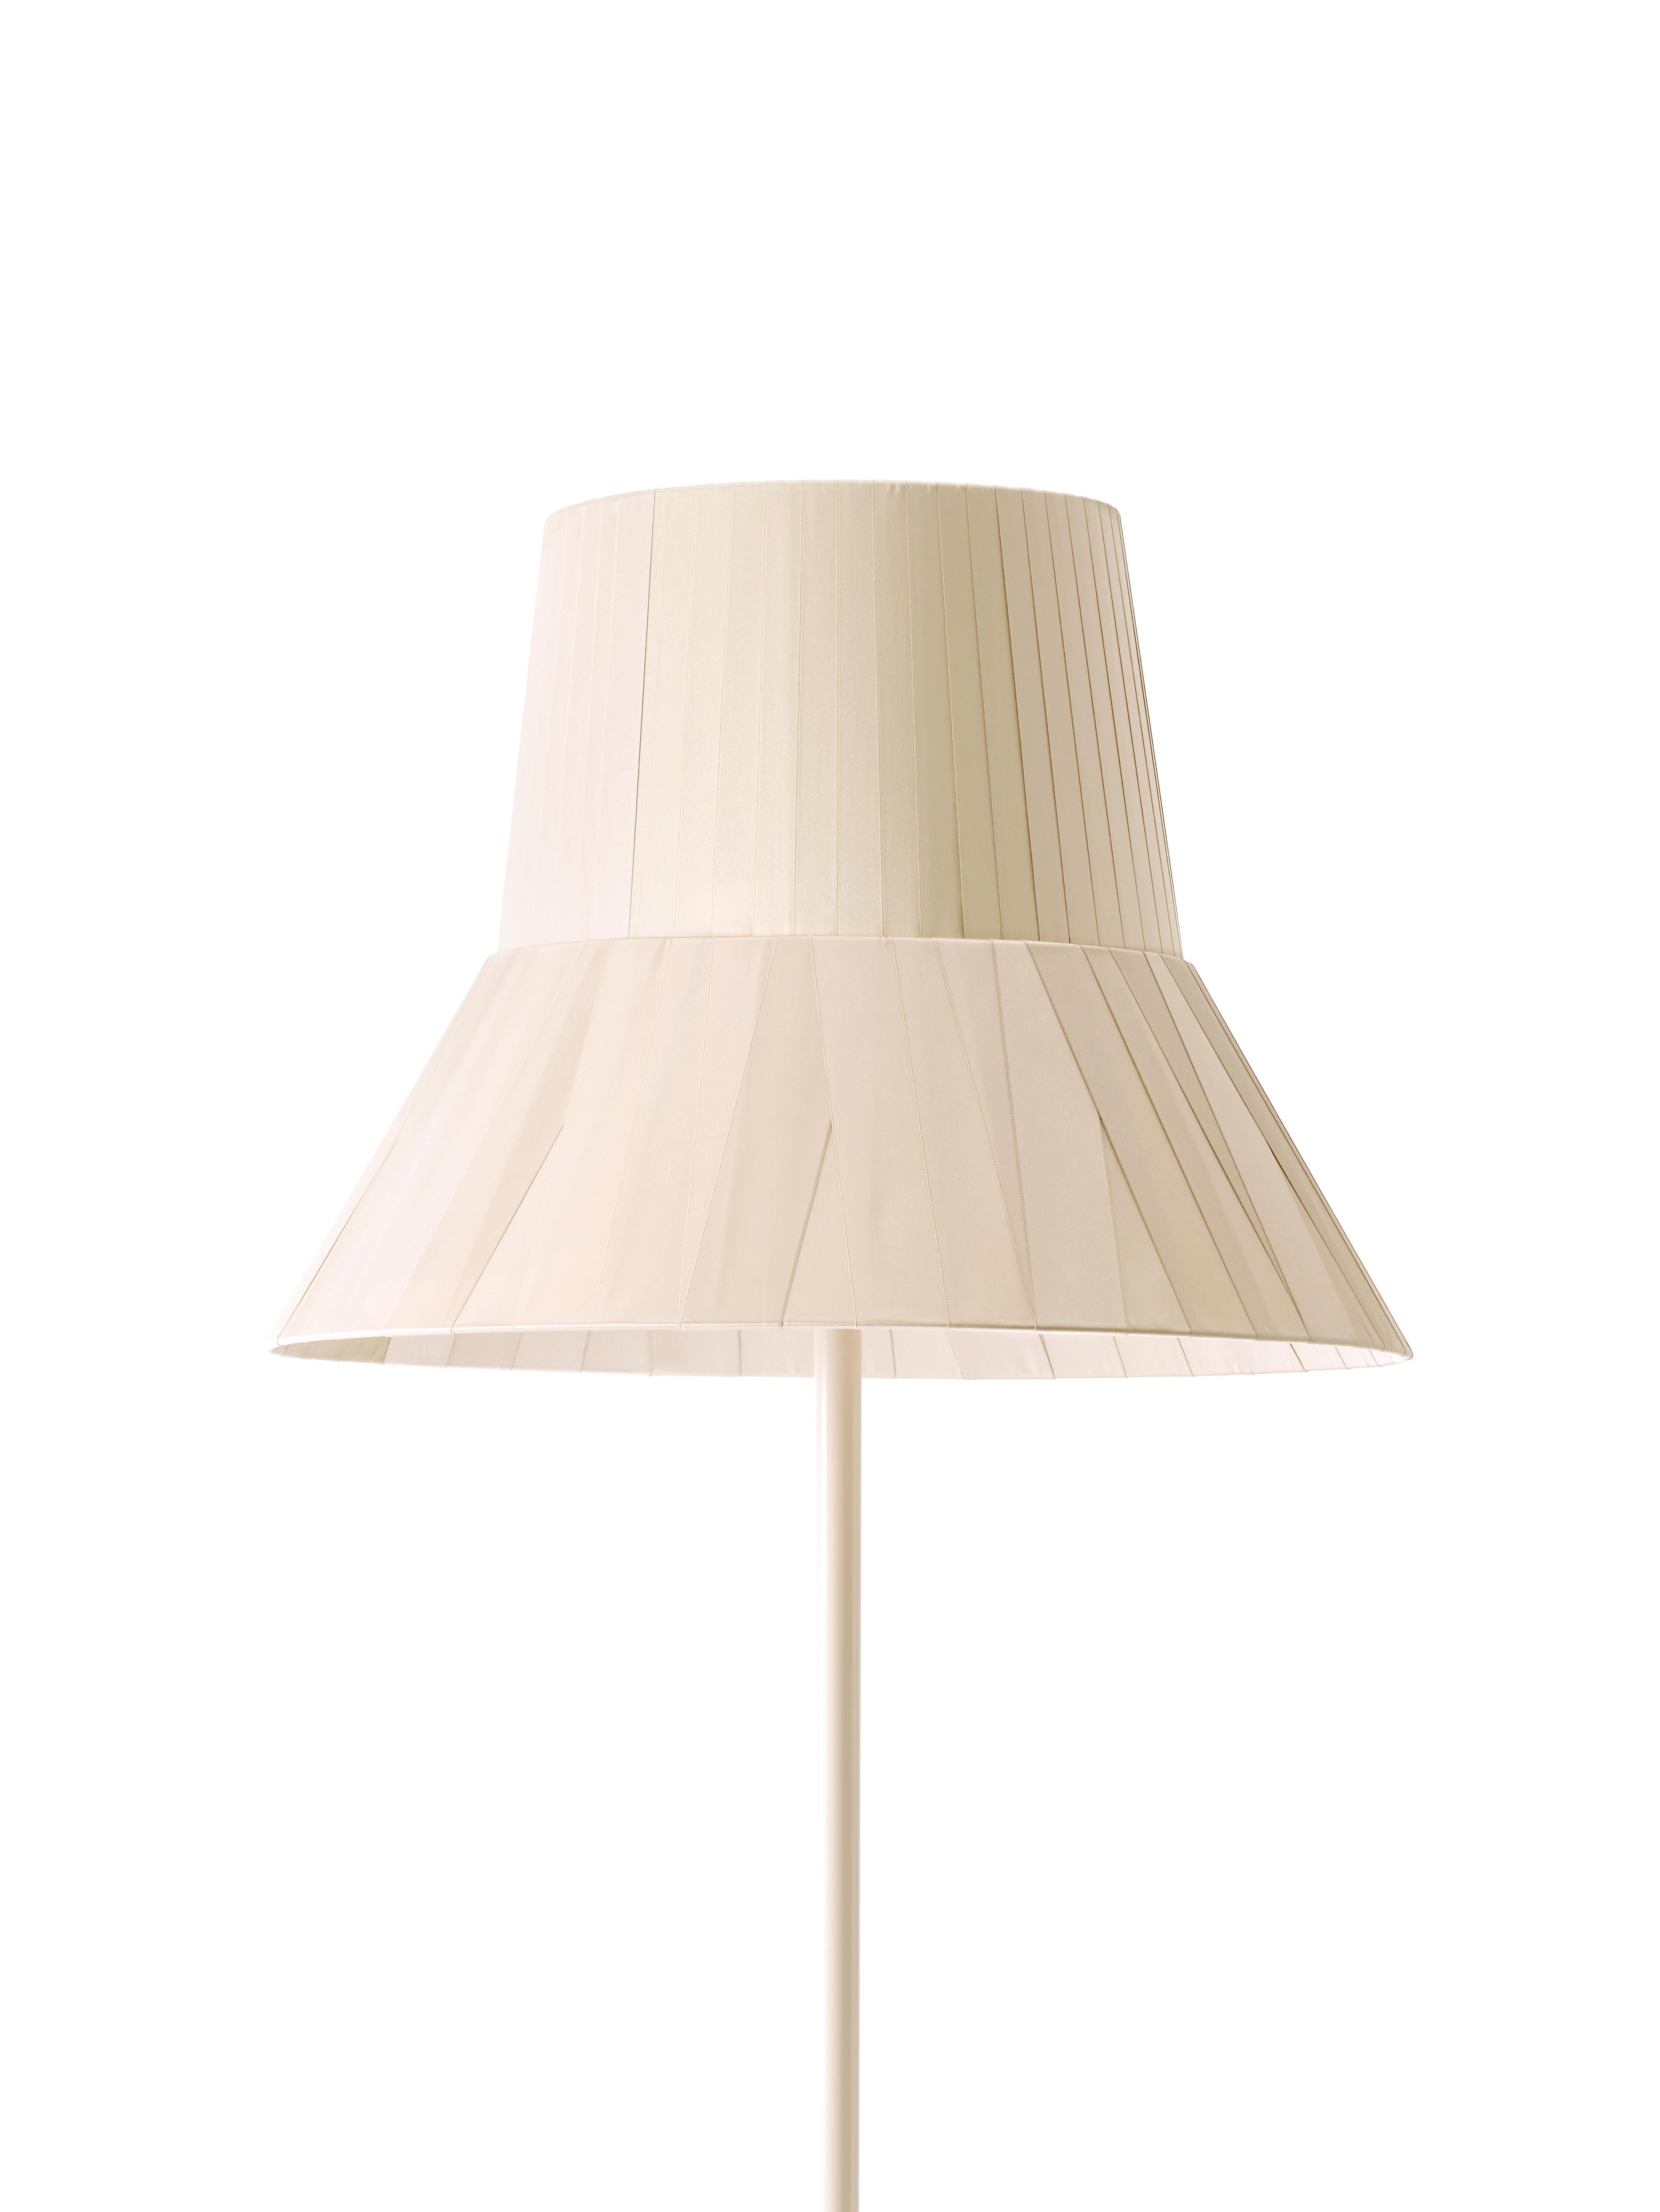 Inspired by an Audrey Hepburn hat, this lamp embodies a certain nostalgia. Nostalgia for an icon of elegance, nostalgia for an enchanting style, nostalgia for a handmade product.
Metal base in powder-coating, satin finish.
Lampshade in 2 parts, top